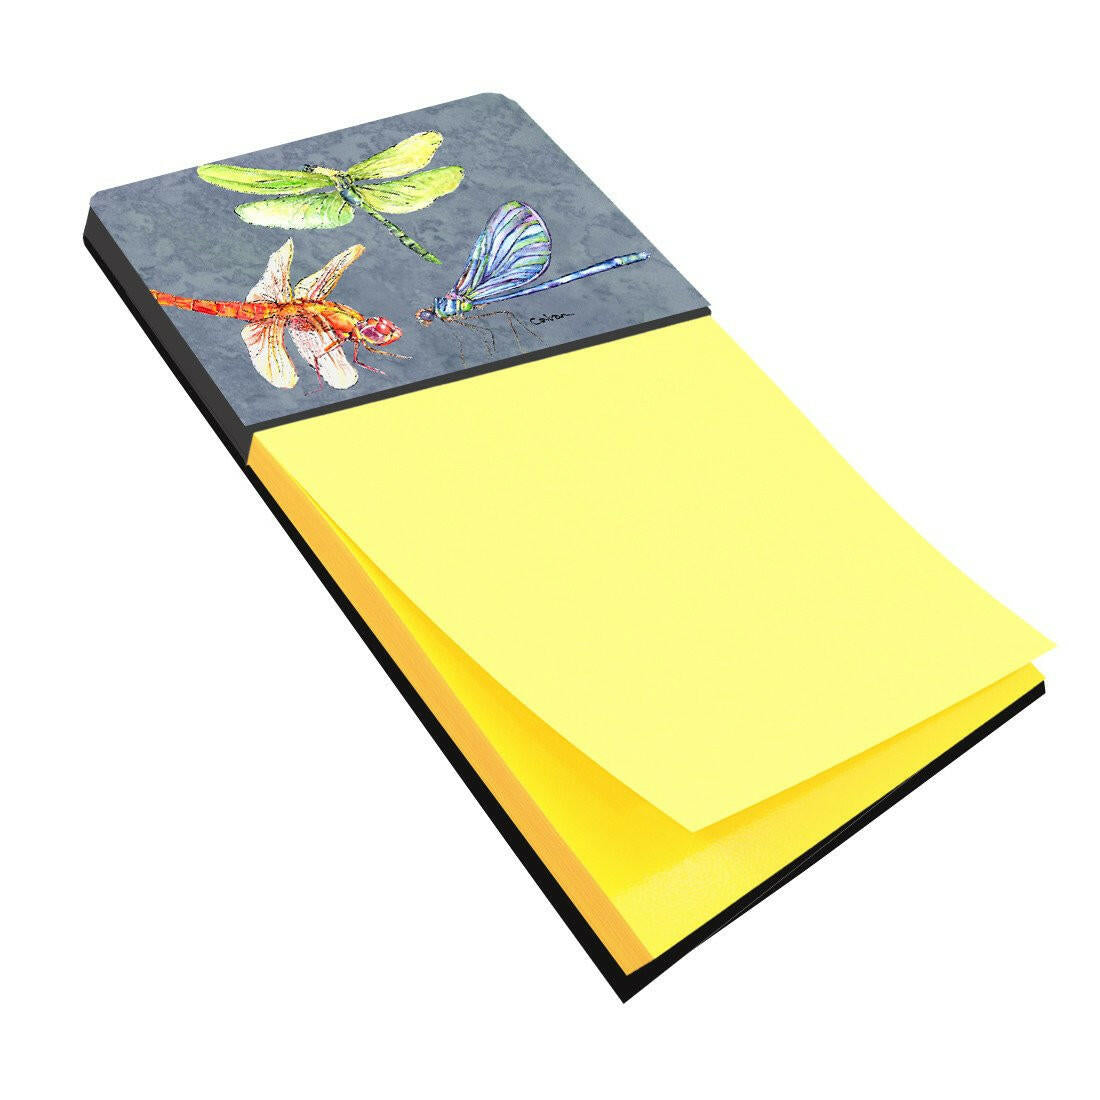 Dragonfly Times Three Refiillable Sticky Note Holder or Postit Note Dispenser 8878SN by Caroline's Treasures